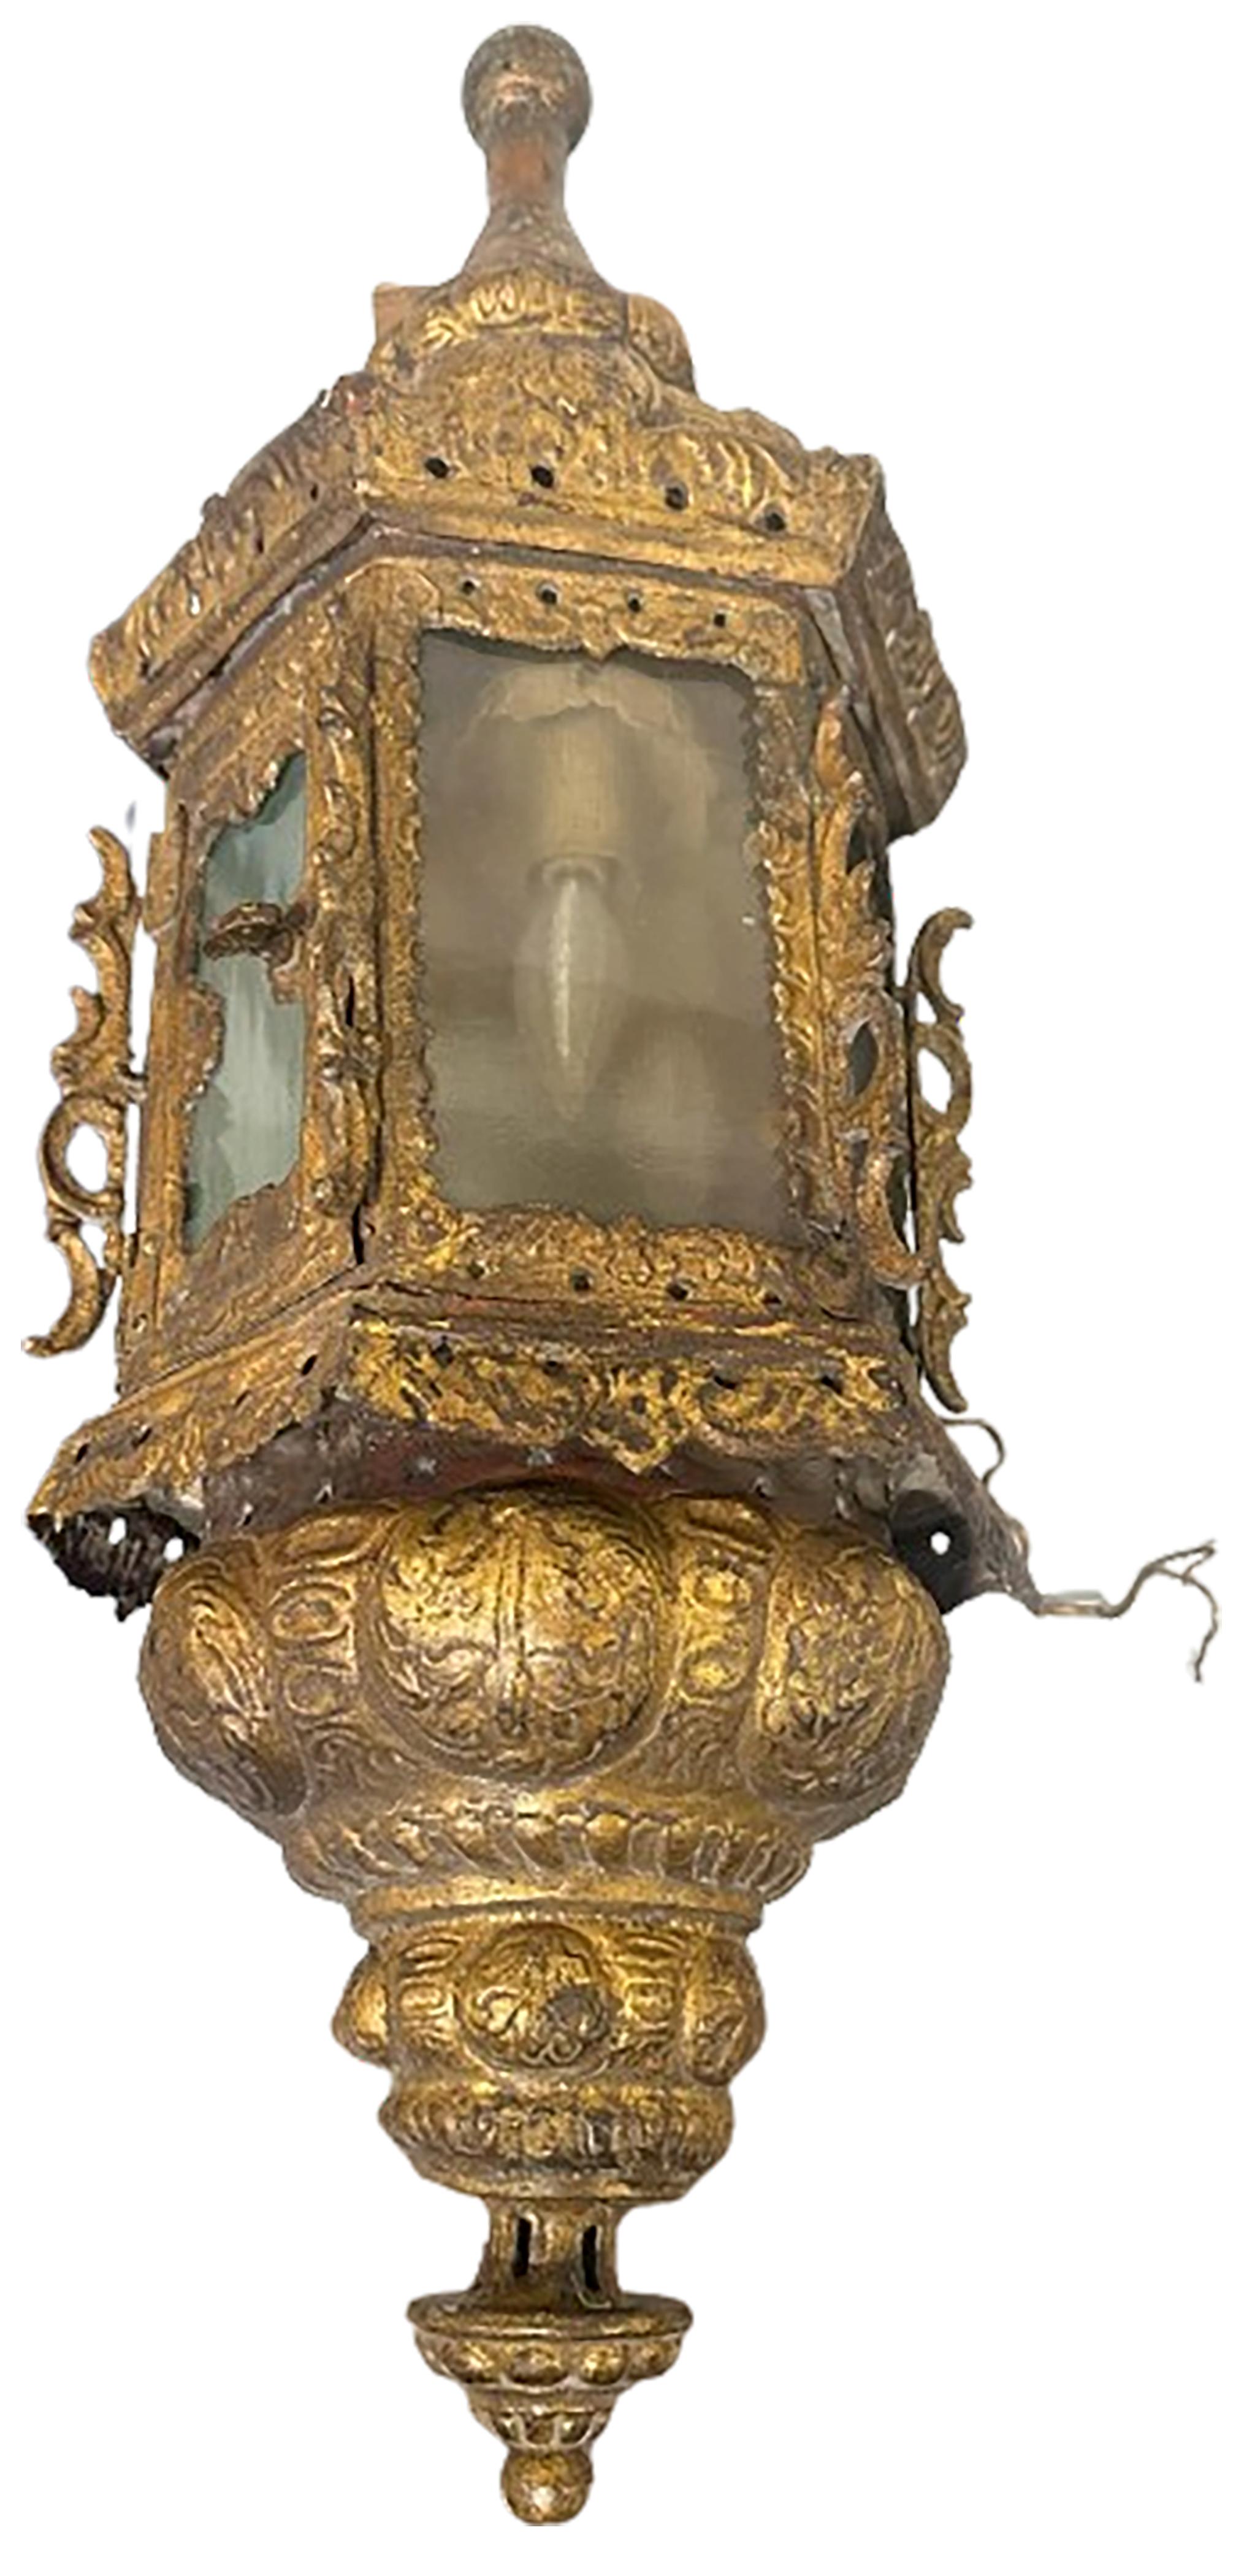 A bold near pair of electric gilt metal torch sconces.  Made between the 17th to 18th century made in Venice Italy. Light bulbs included on the inside. Hardware for wall installation included on the back. Beautifully intricate individualized